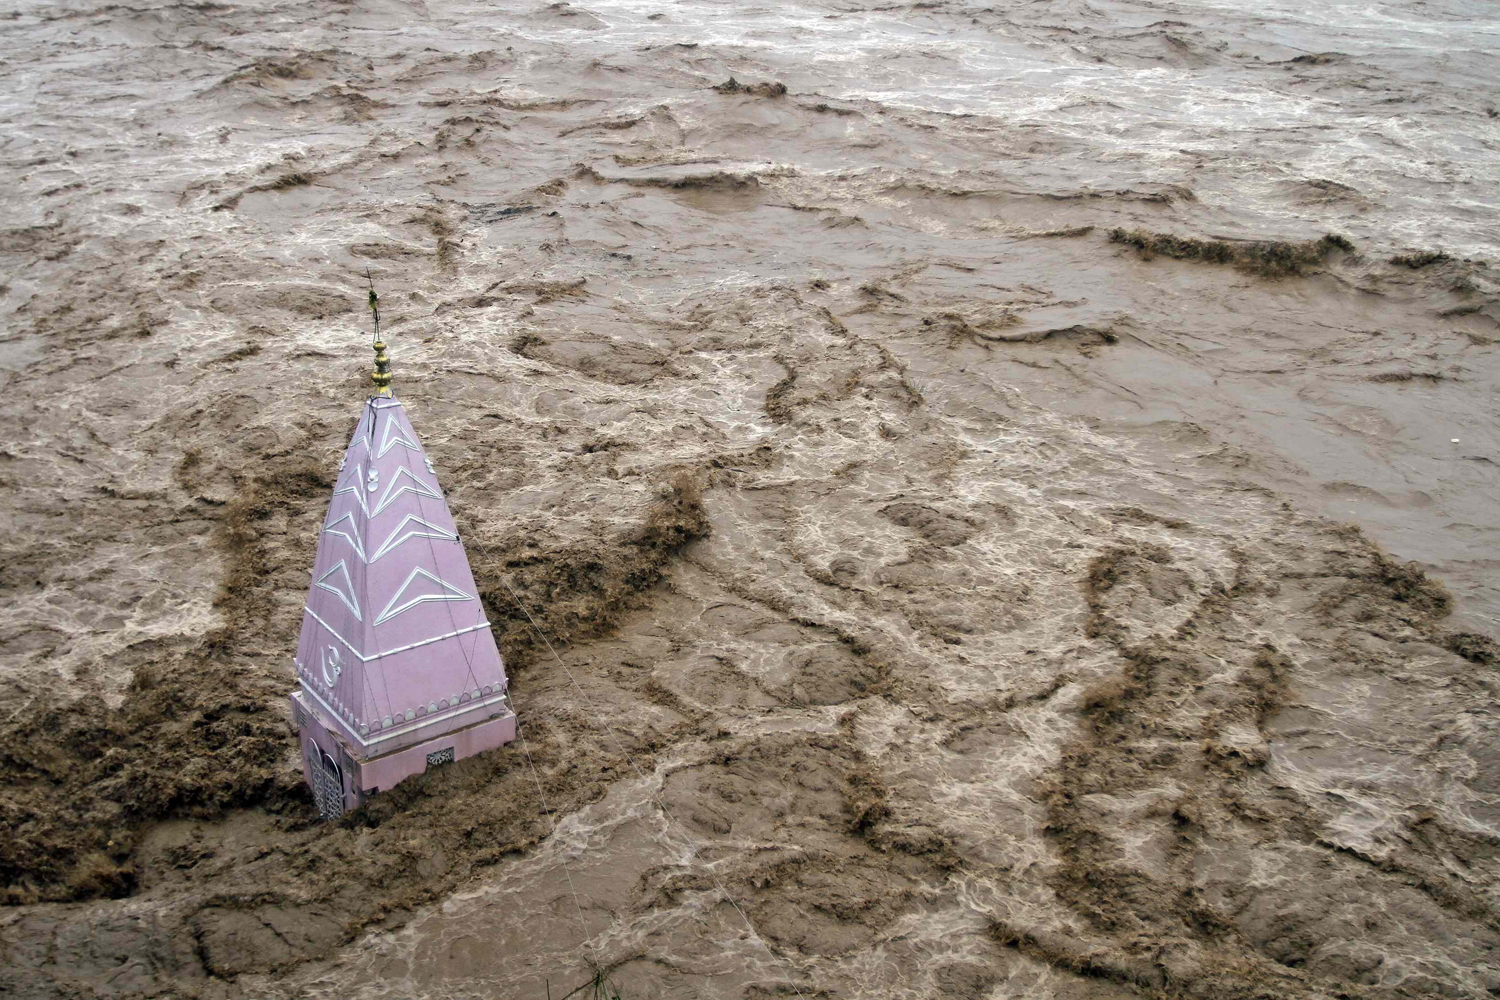 A temple stands amid the waters of the overflowing river Tawi during heavy rains in Jammu